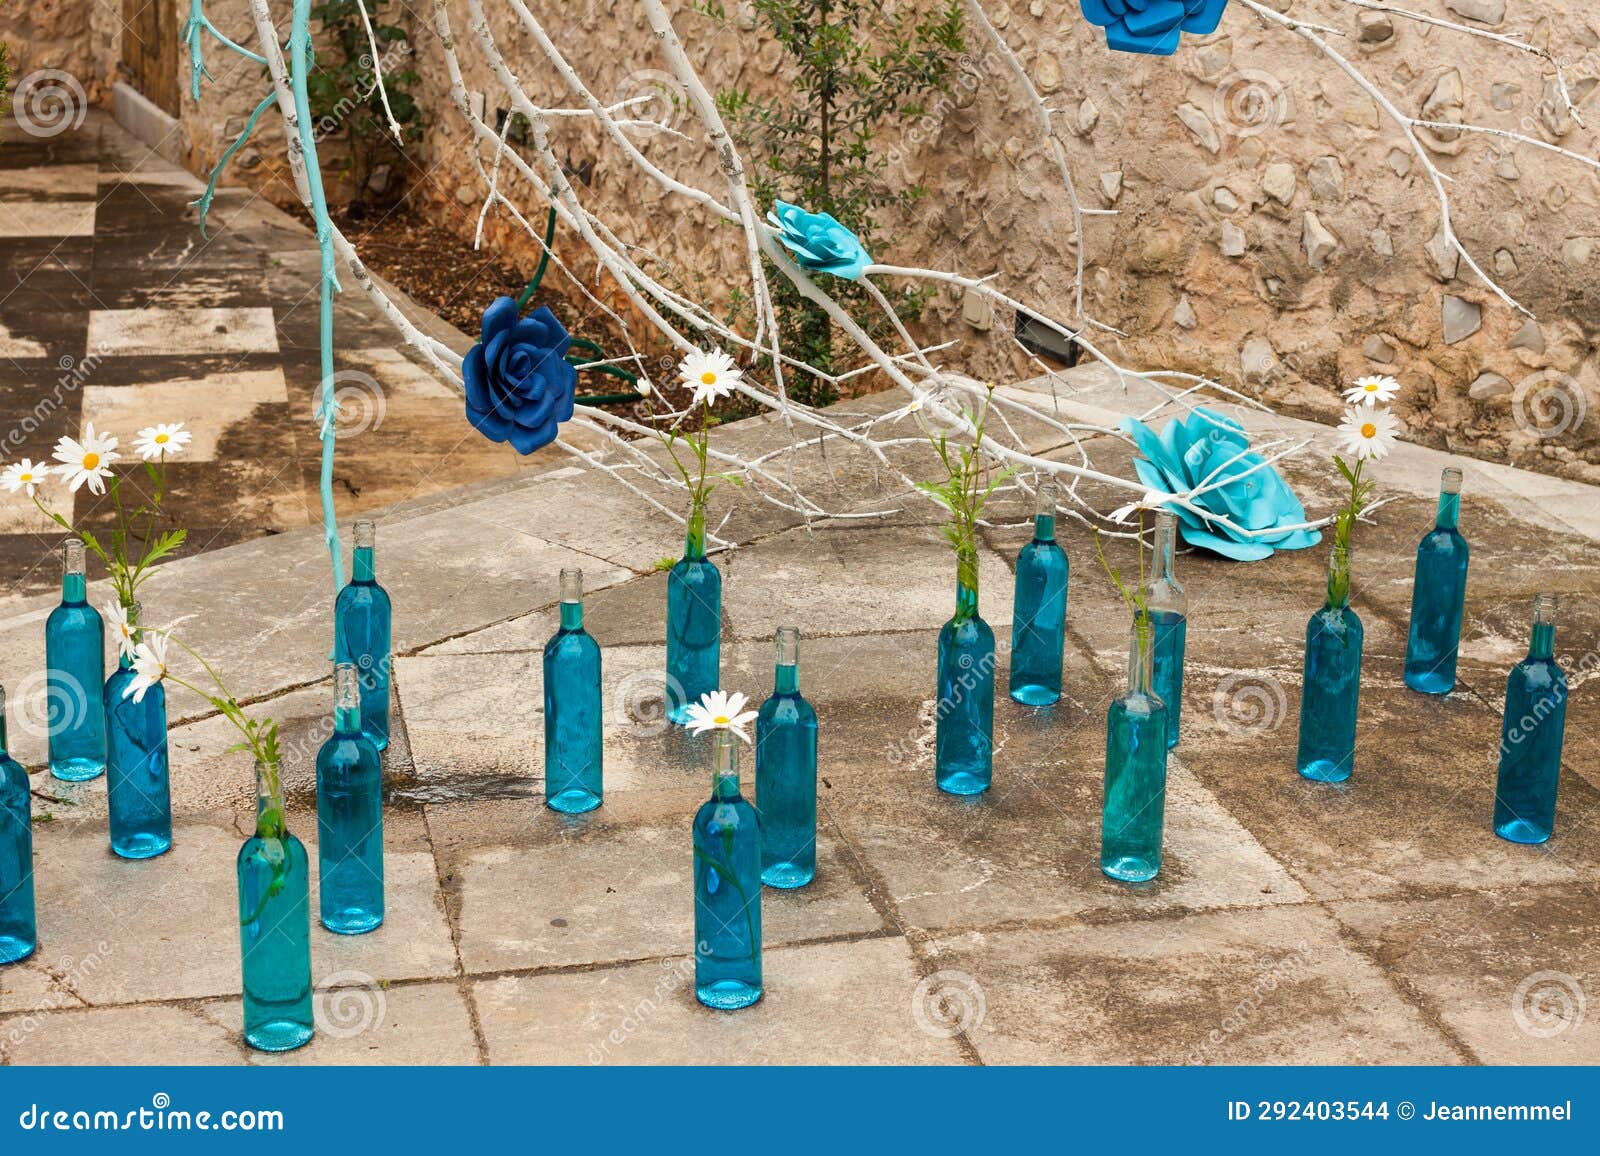 branch with blue roses and some blue bottles with daisies on the floor on 